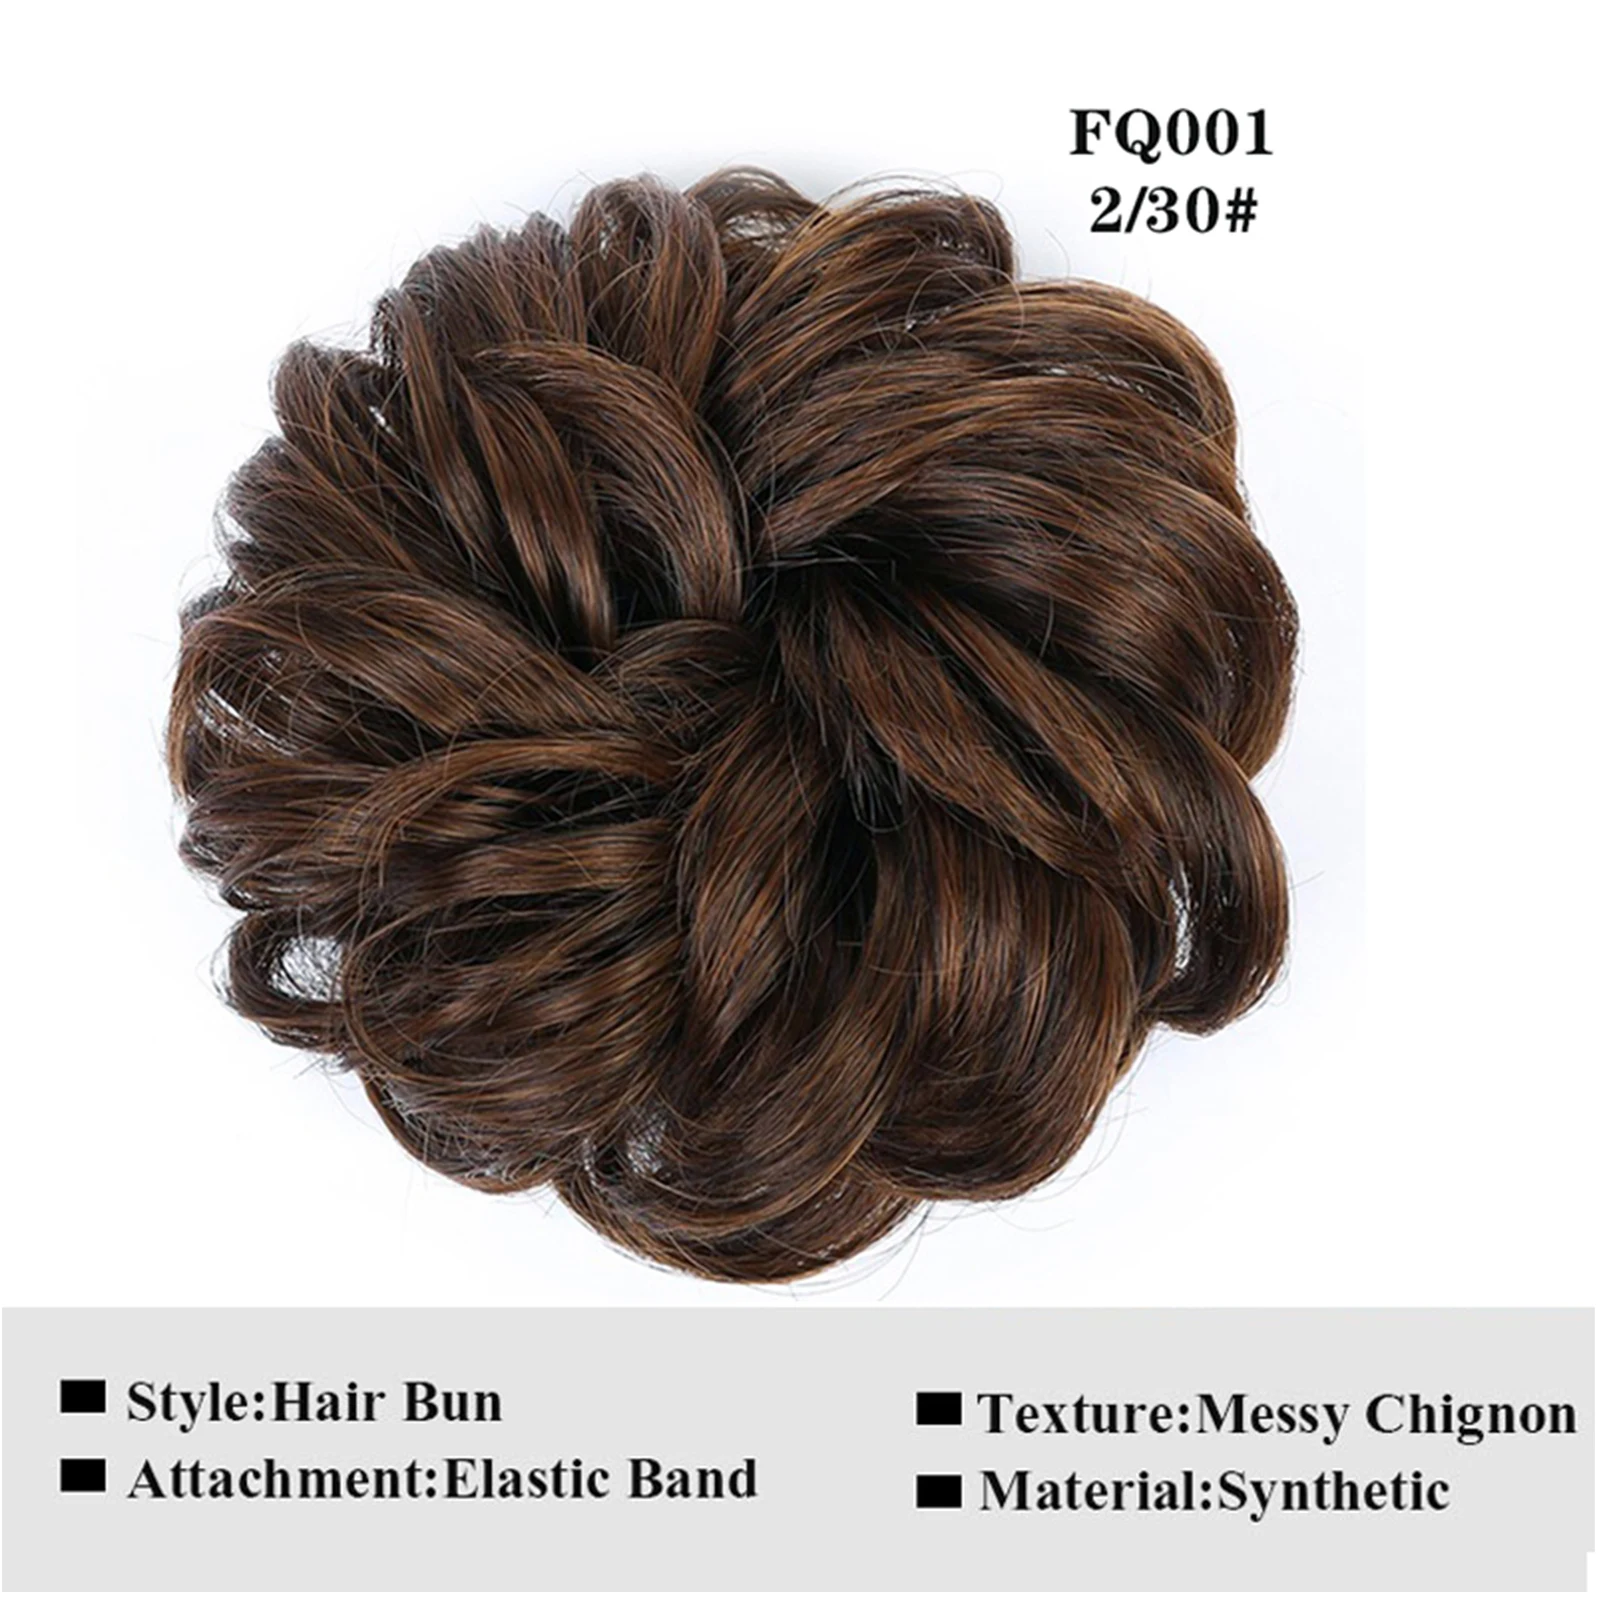 LUPU Synthetic Messy Hair Bun Elastic Hair Bands Extension Curly Wavy Chignon Hairpieces for Women Girls Tousled Updo Scrunchie